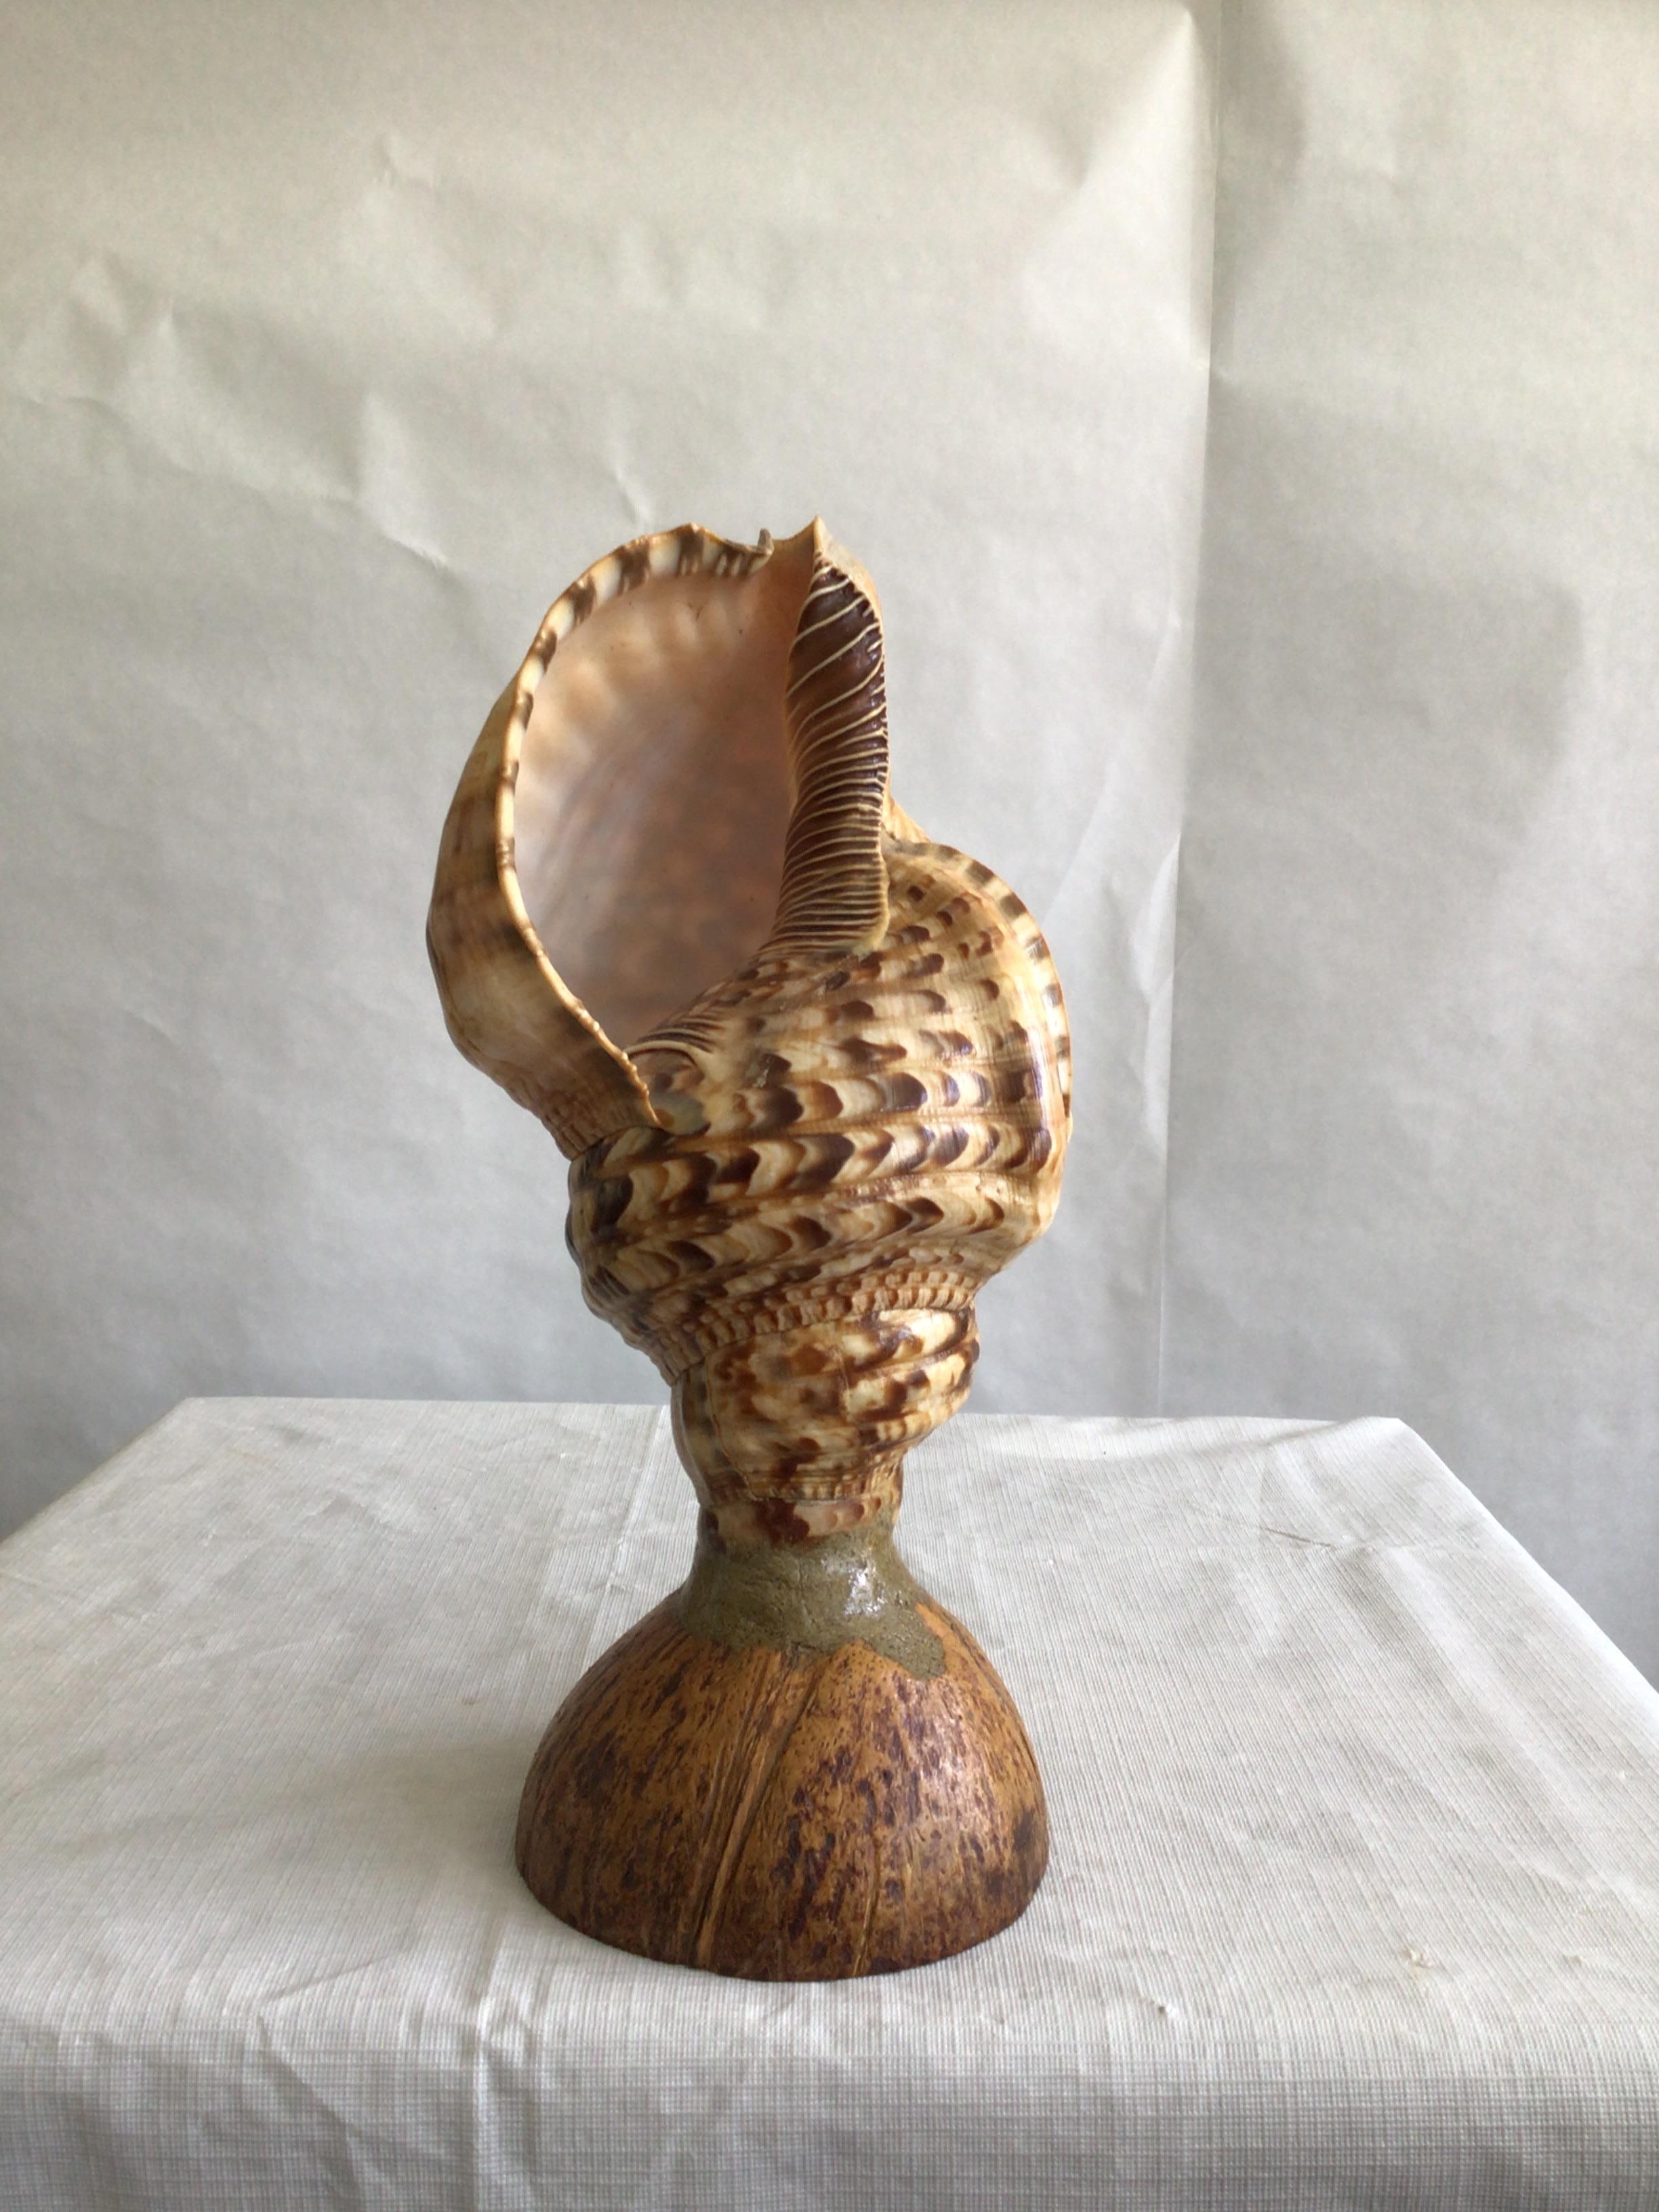 1940s Triton Conch Shell Lamp On Coconut Base
Natural shell 
Colors: Browns and Creams
Needs Rewiring